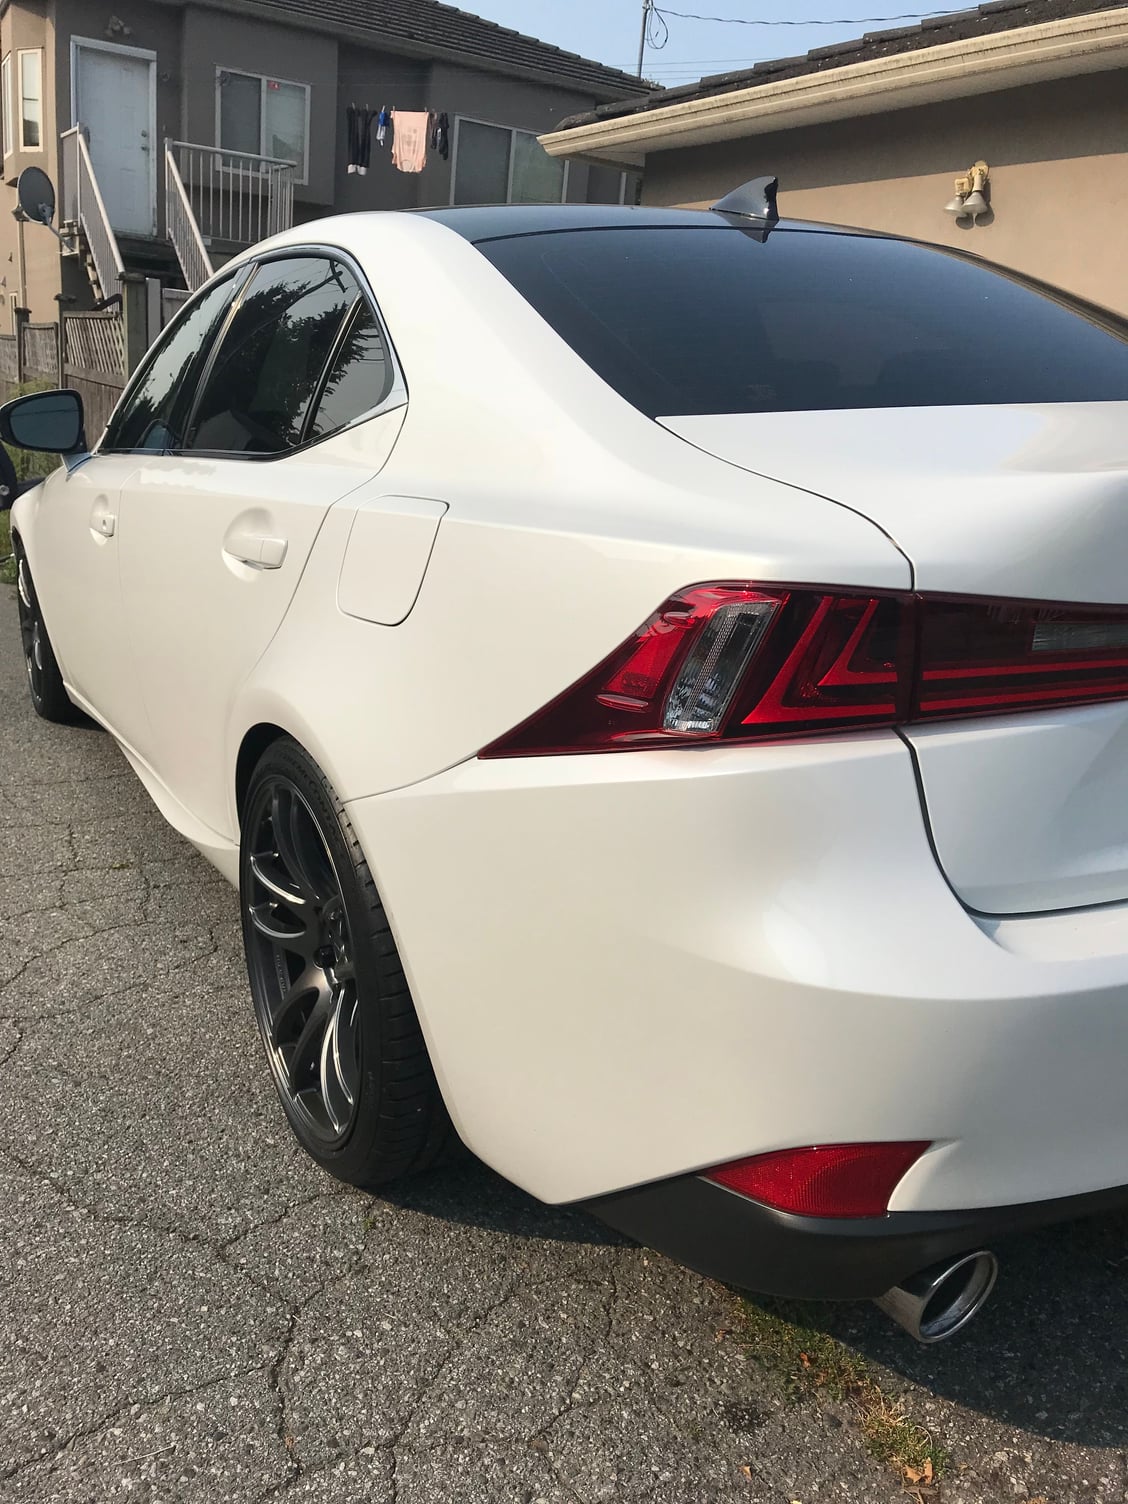 2015 Lexus IS250 - 2015 Lexus IS250 - Used - VIN JTHBF5D26F5054039 - 24,500 Miles - 6 cyl - 2WD - Automatic - Sedan - White - Vancouver, BC V5M1W8, Canada